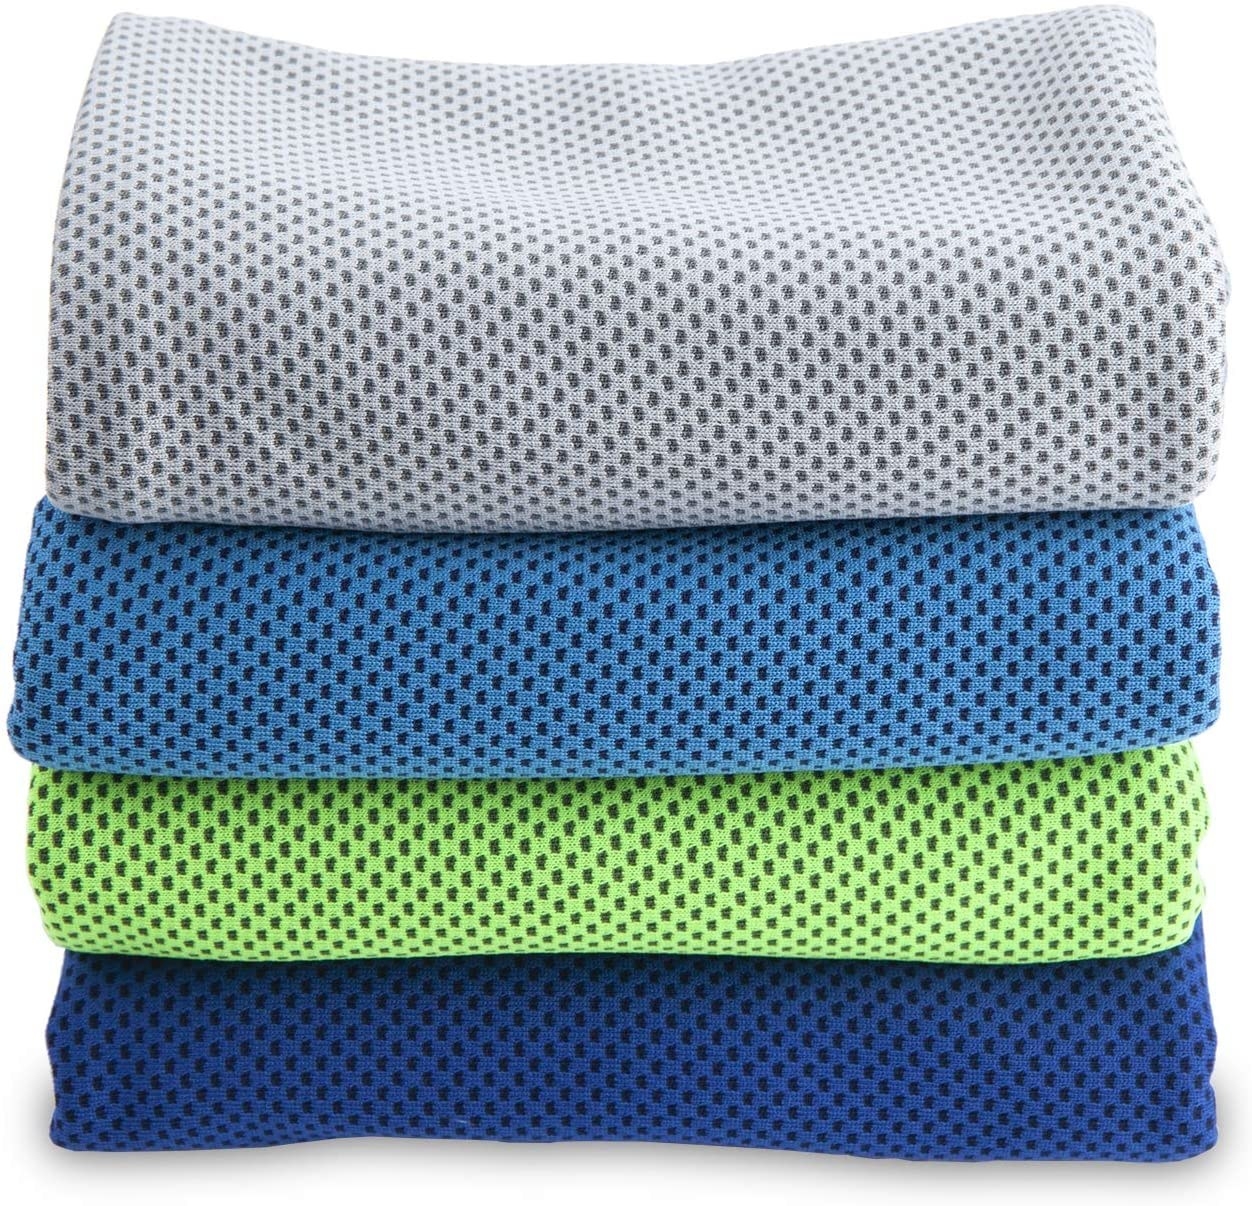 The perforated towels in gray, light blue, green, and dark blue